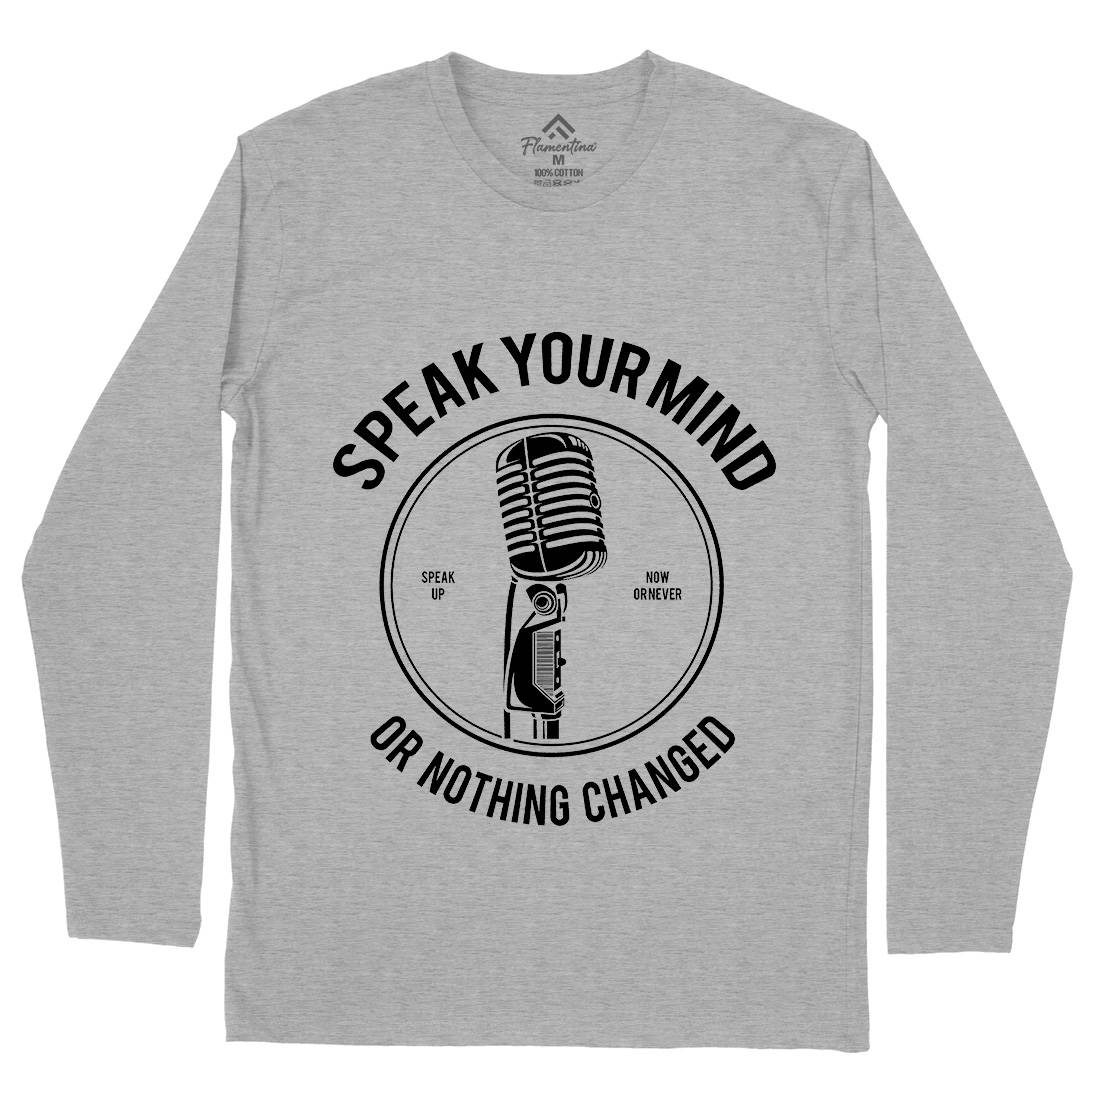 Speak Your Mind Mens Long Sleeve T-Shirt Quotes A152